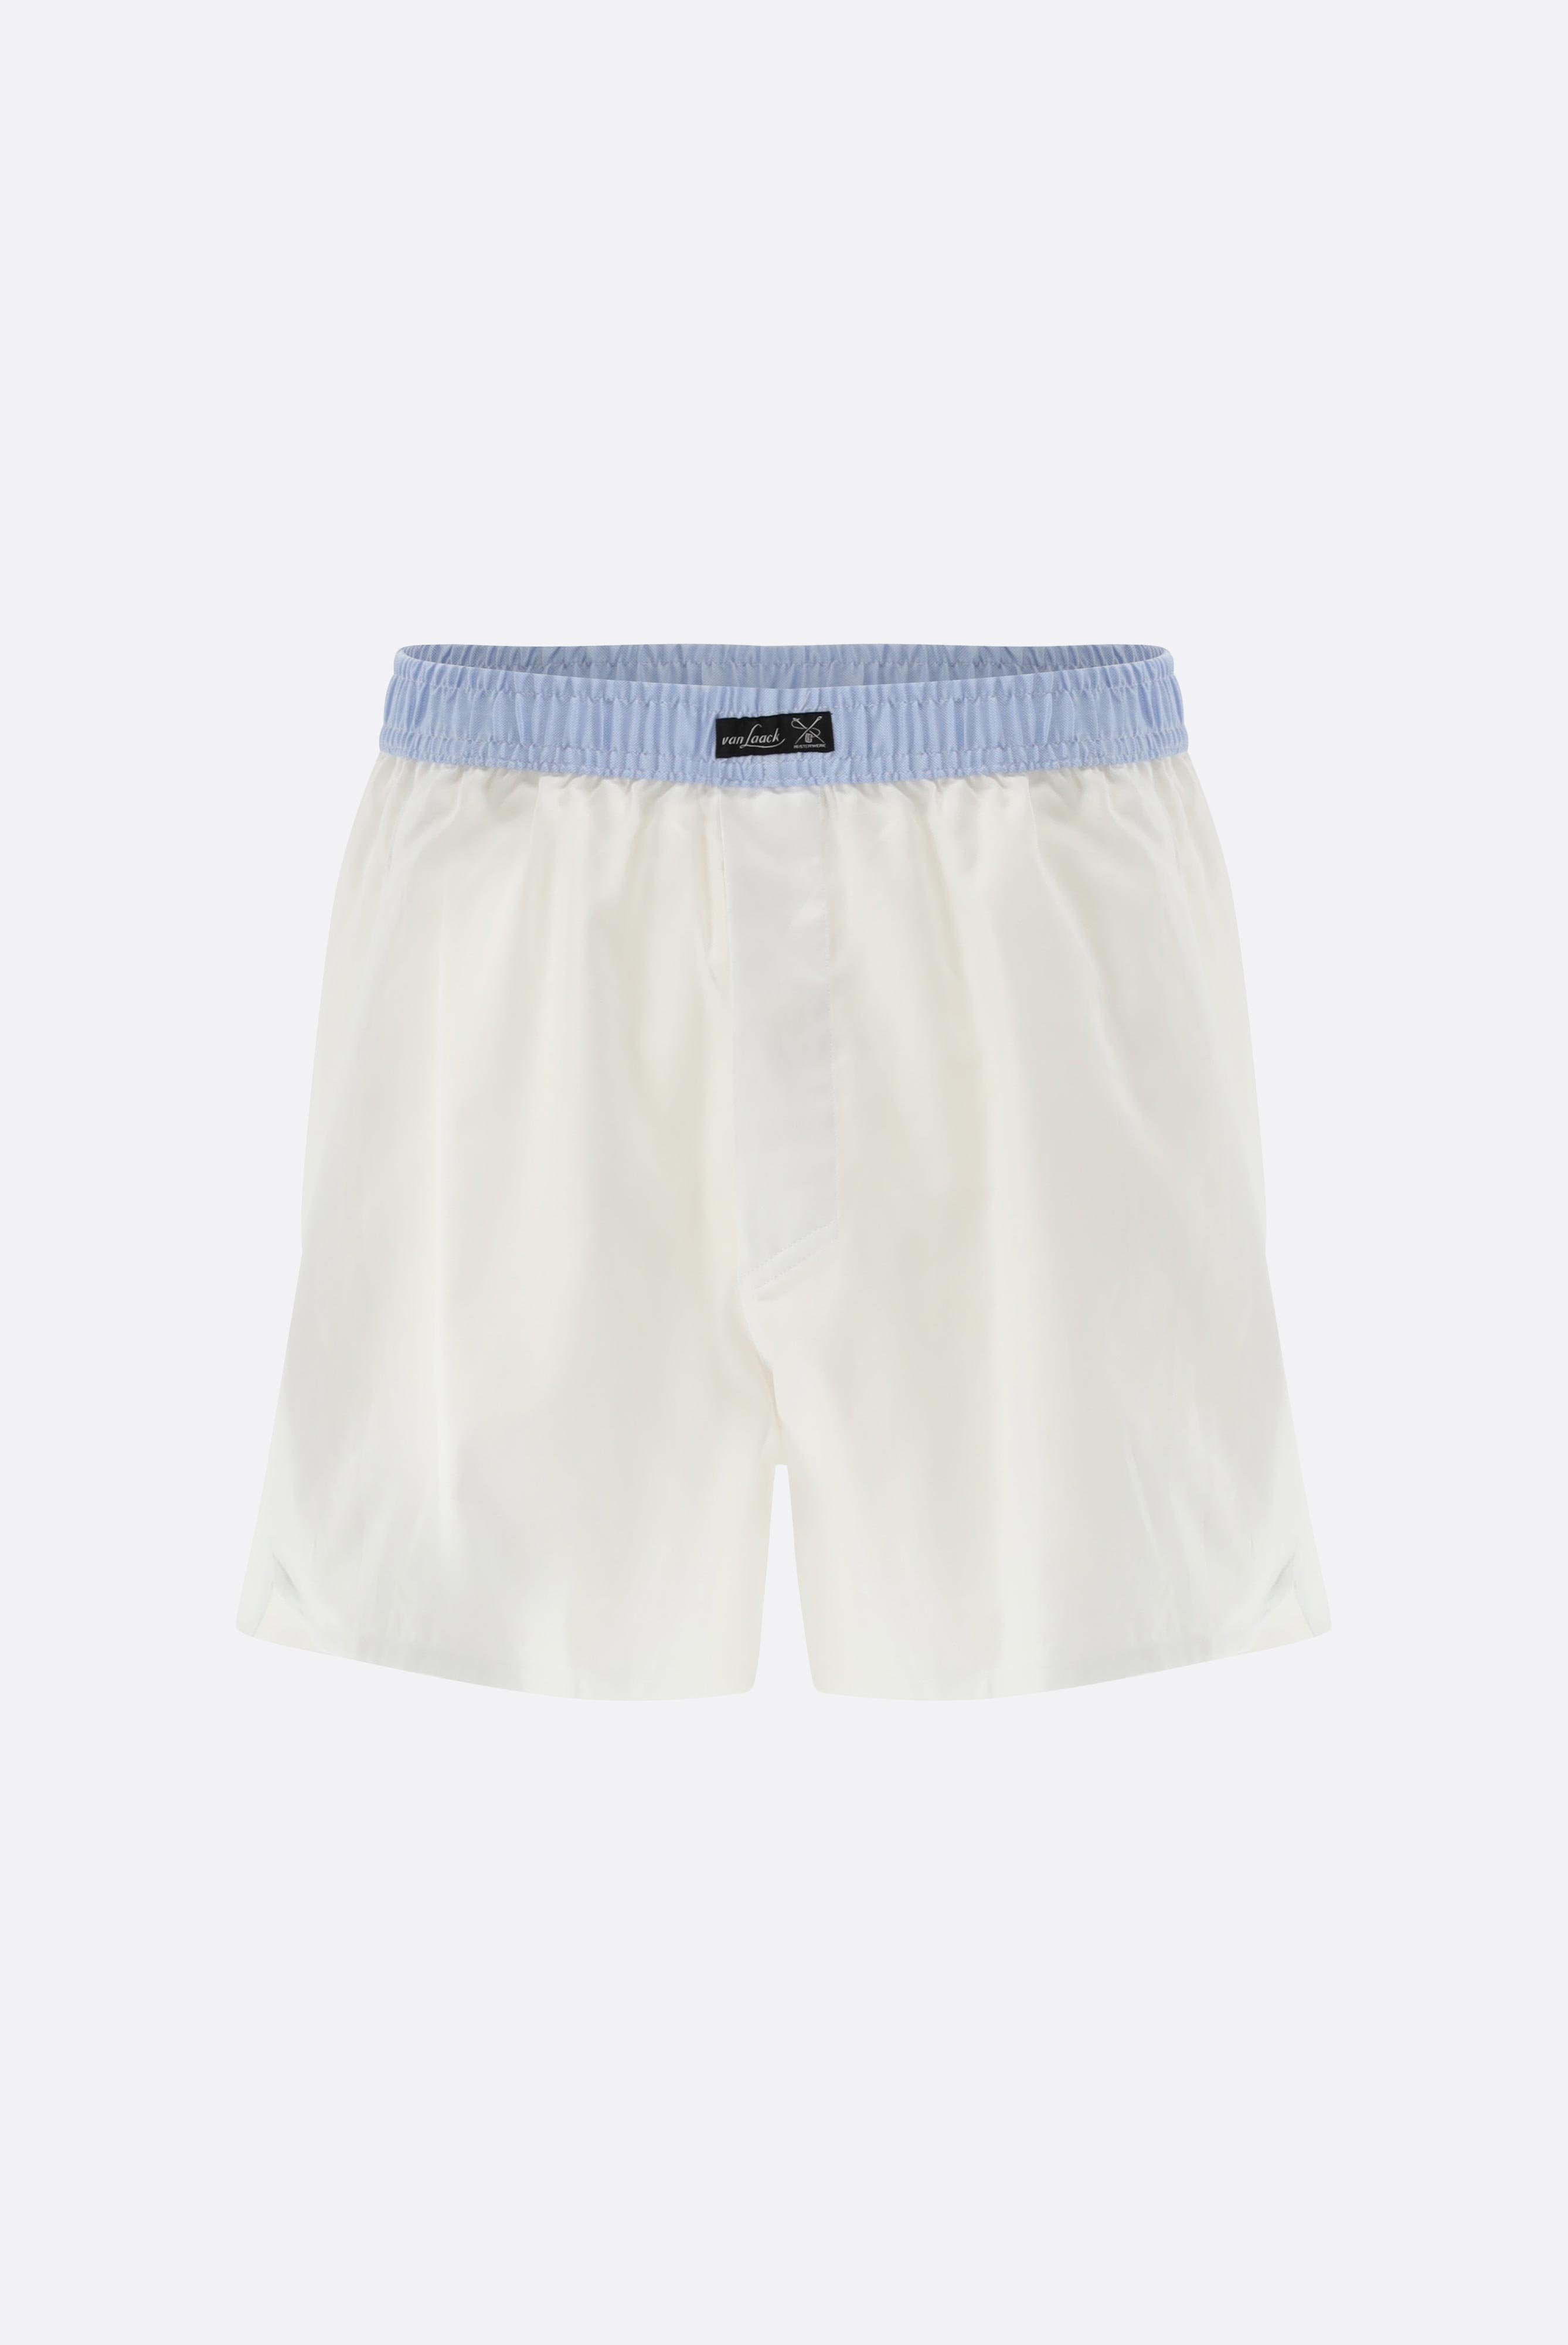 Underwear+Oxford Boxer Shorts with Waistband Contrast+91.1100.V1.150251.000.46